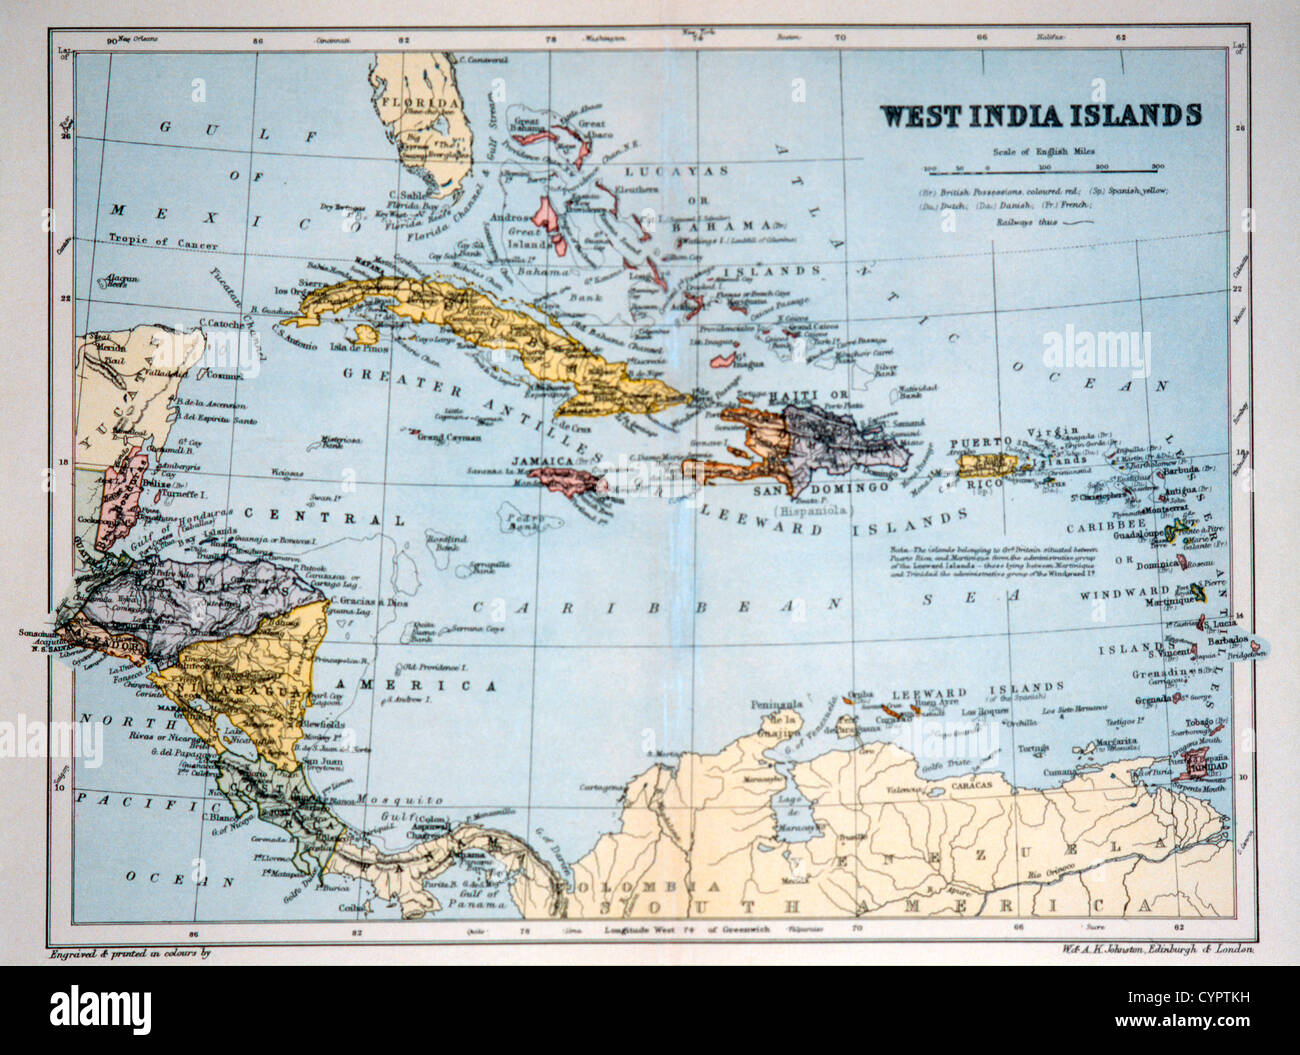 West India Islands, Historical Map, Circa 1893 Stock Photo